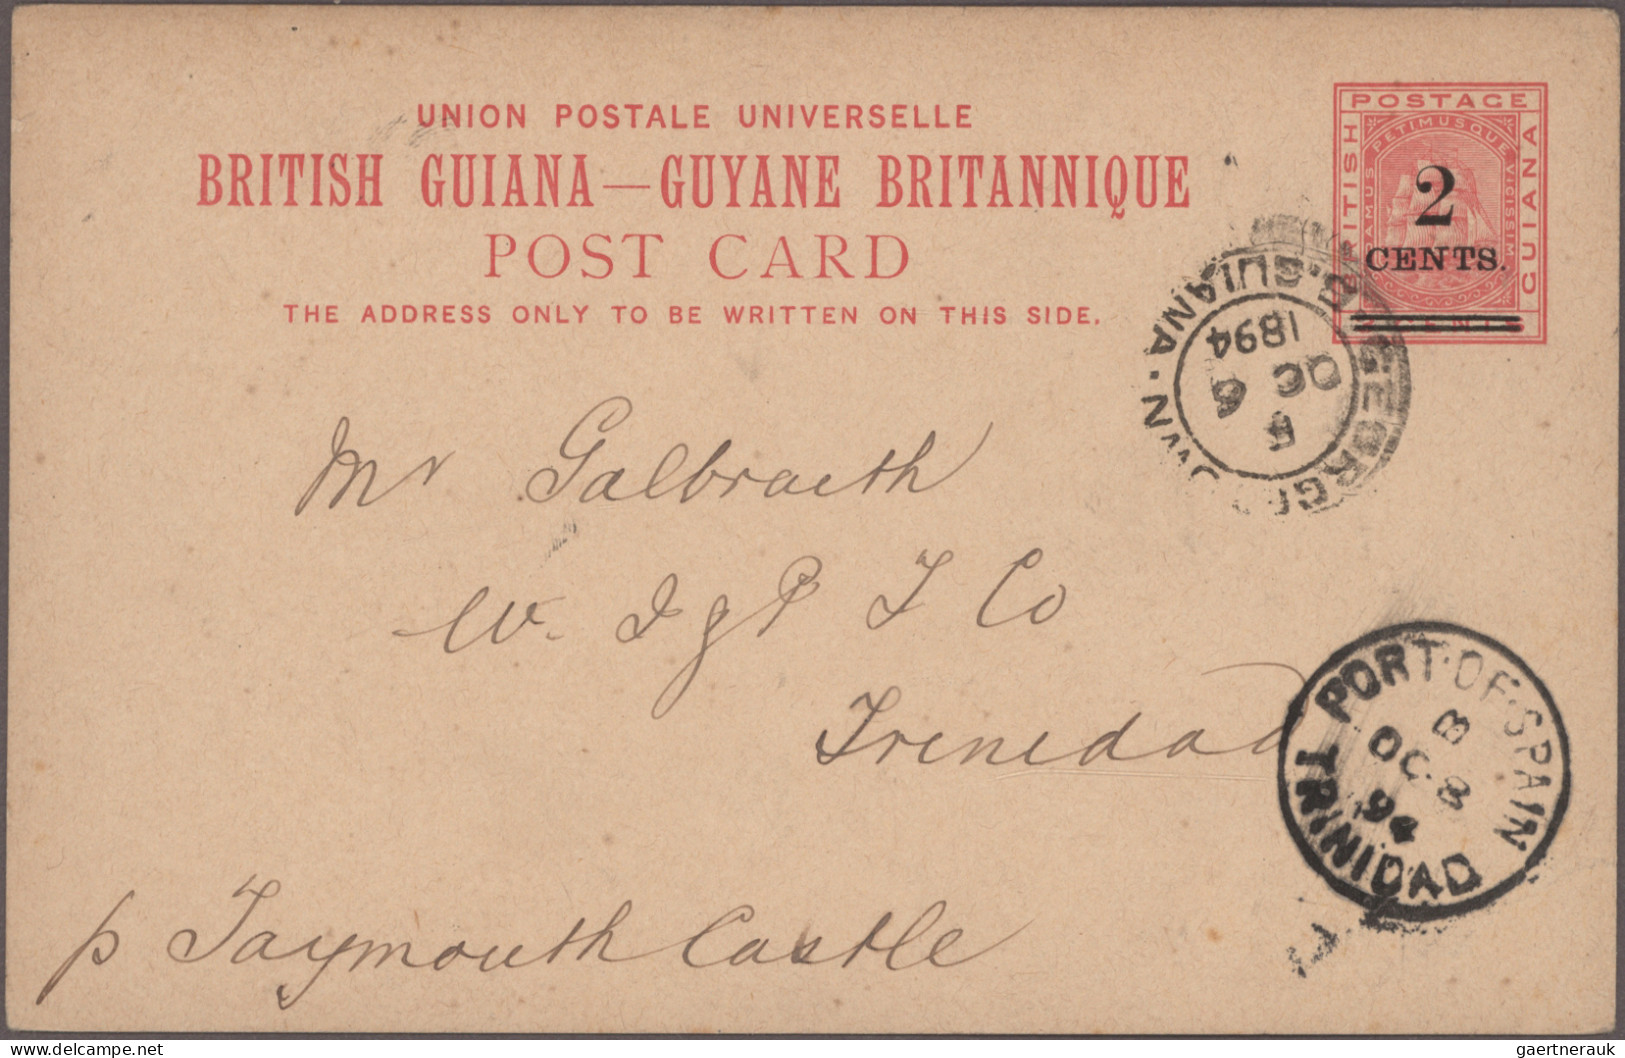 British Guiana - postal stationery: 1879/1923 Collection of about 120 postal sta